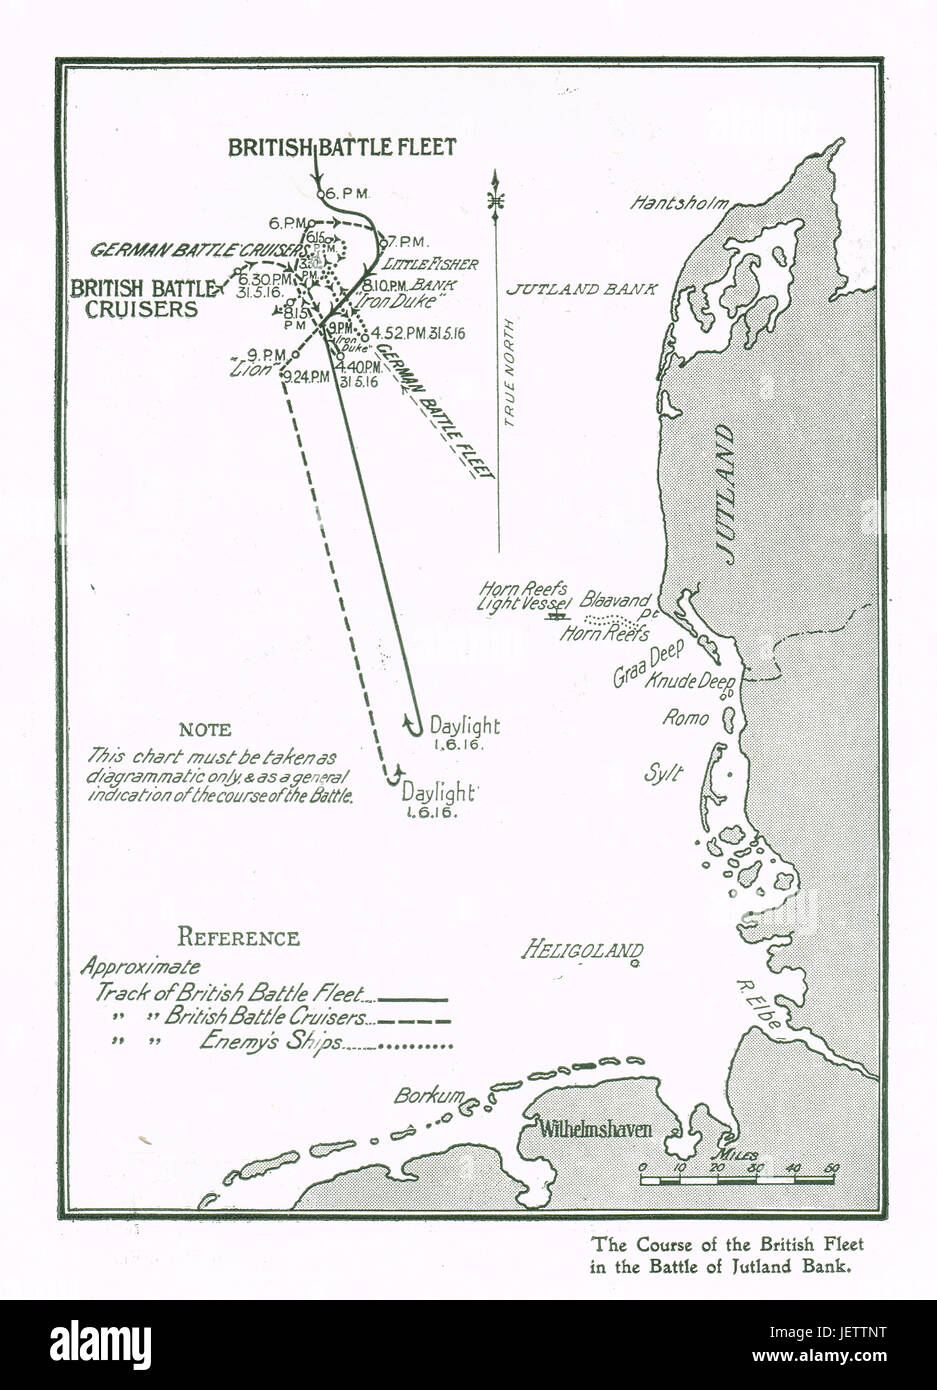 Map showing the course of the British Fleet, Battle of Jutland 1916 Stock Photo